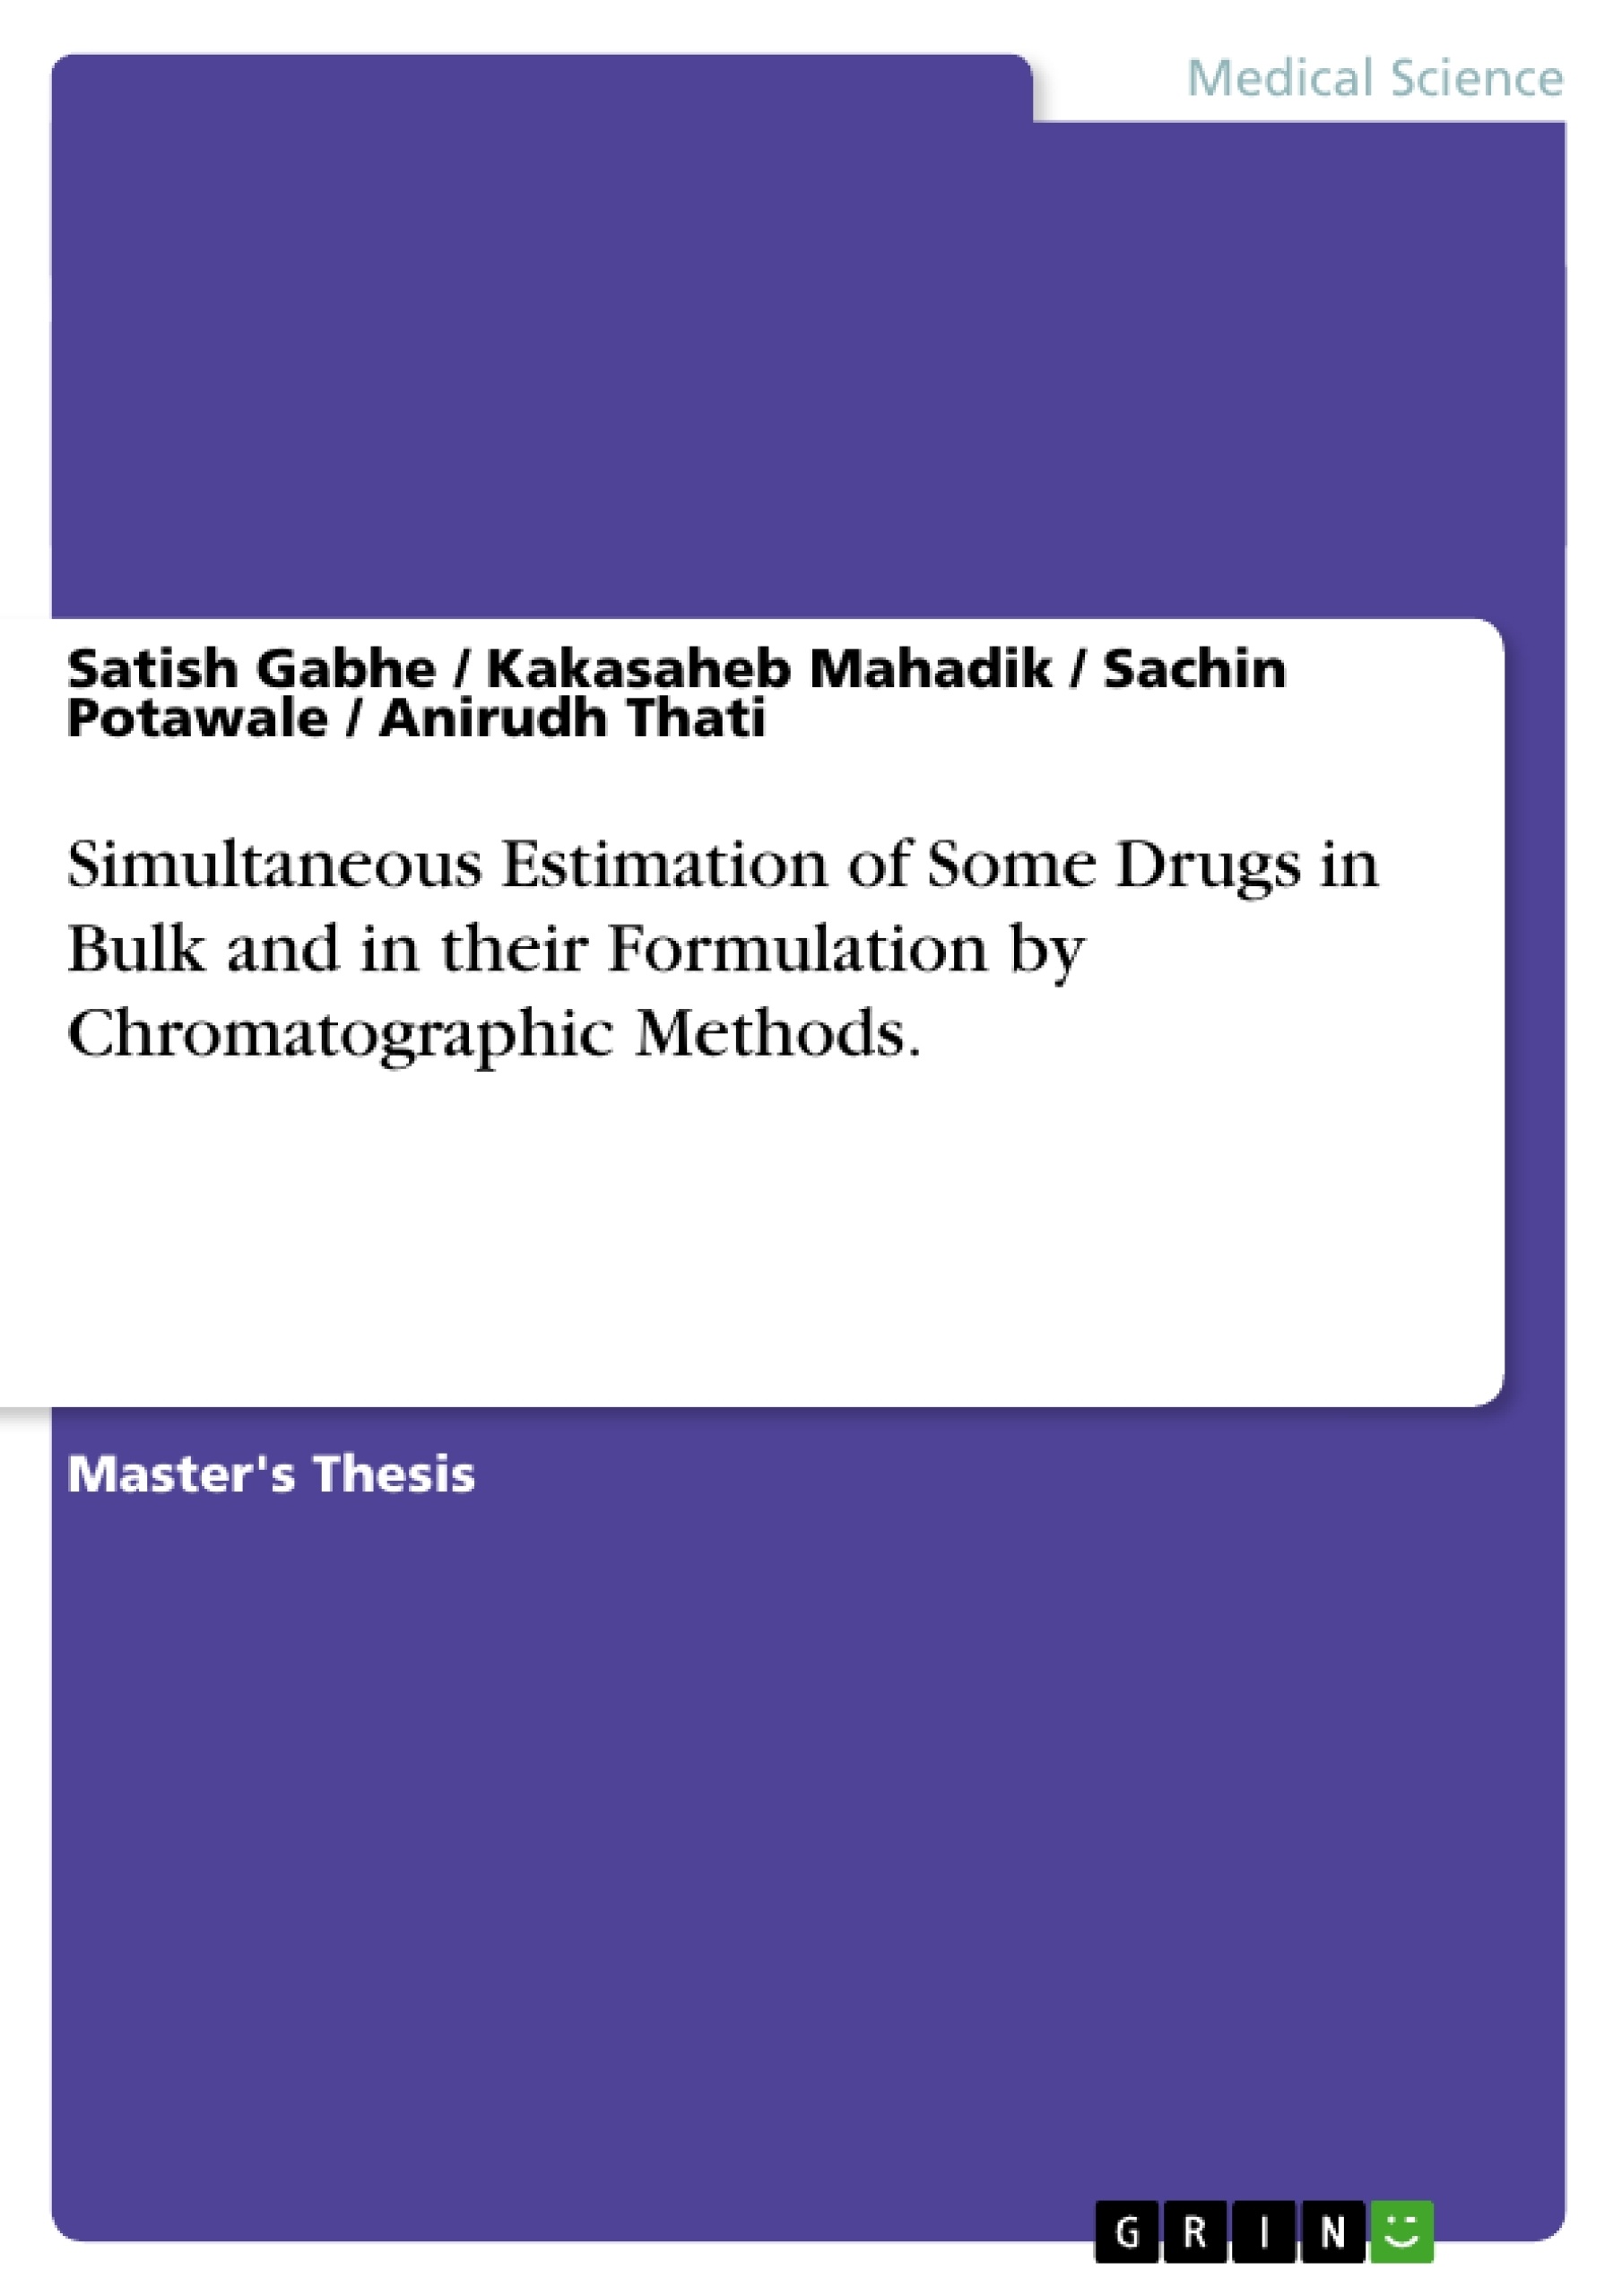 Title: Simultaneous Estimation of Some Drugs in Bulk and in their Formulation by Chromatographic Methods.